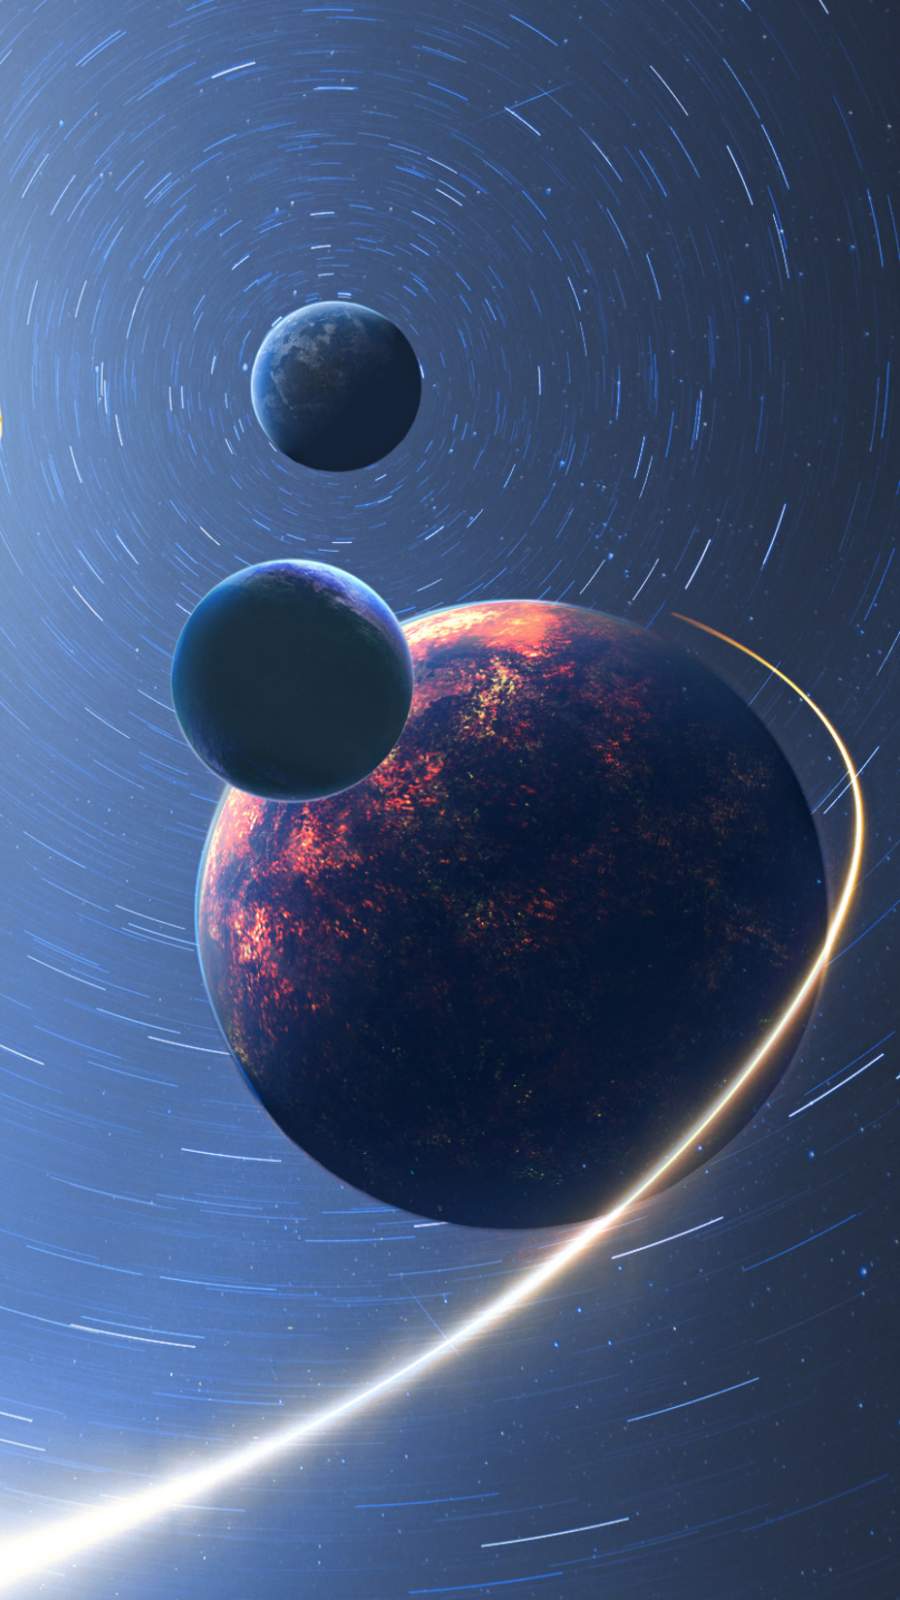 Space Planets Iphone Wallpaper Iphone Wallpapers Iphone Wallpapers 2464